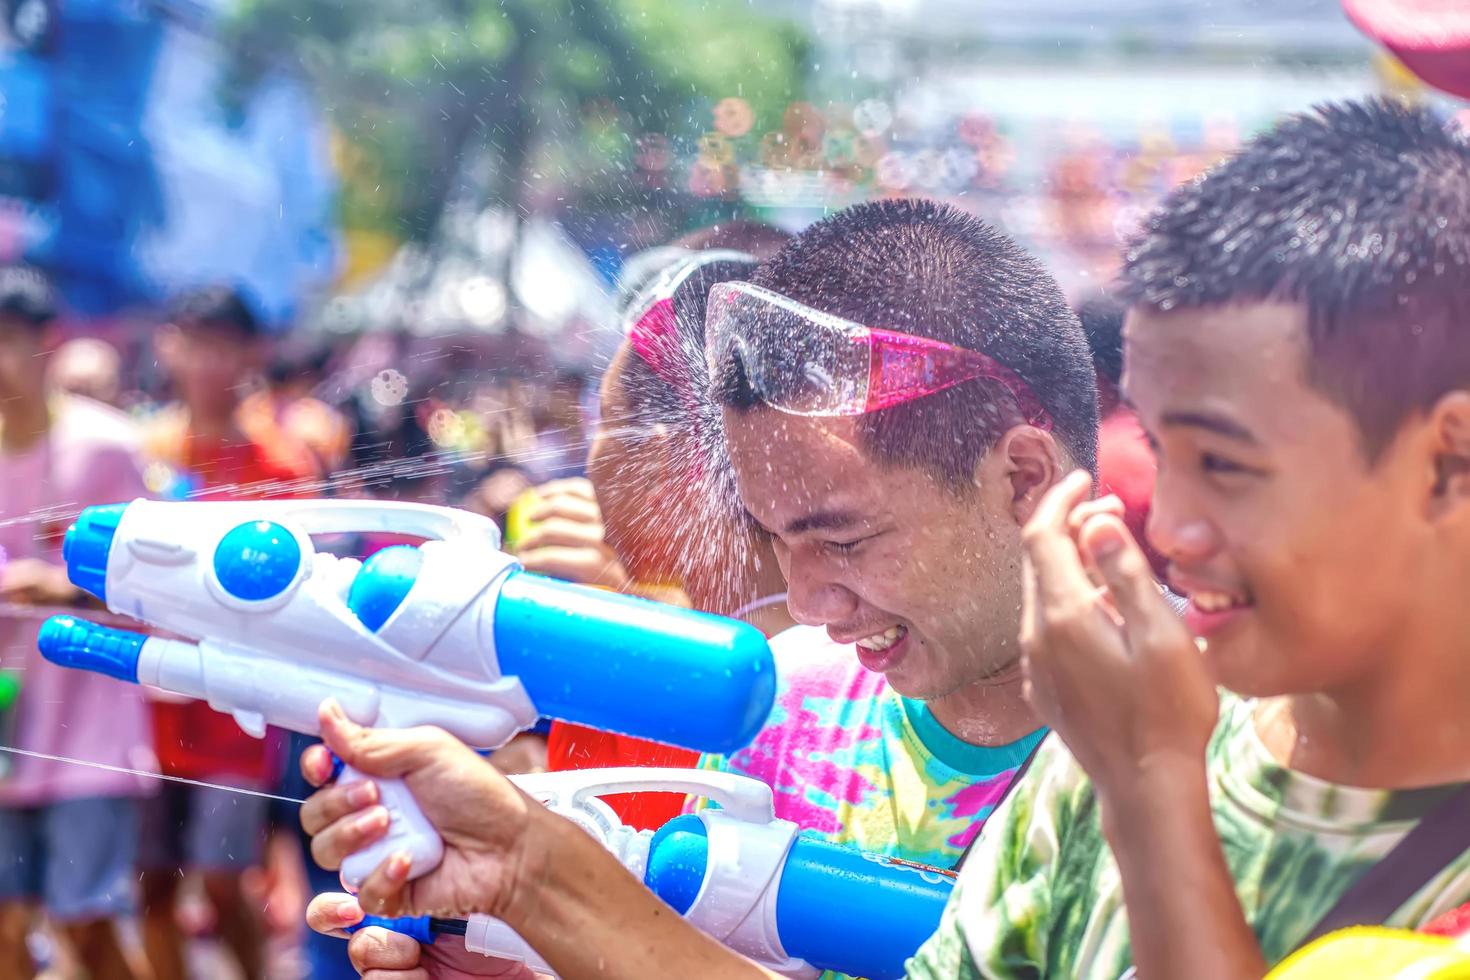 Siam Square, Bangkok, Thailand - APR 13, 2019 short action of people joins celebrations of the Thai New Year or Songkran in Siam Square. photo